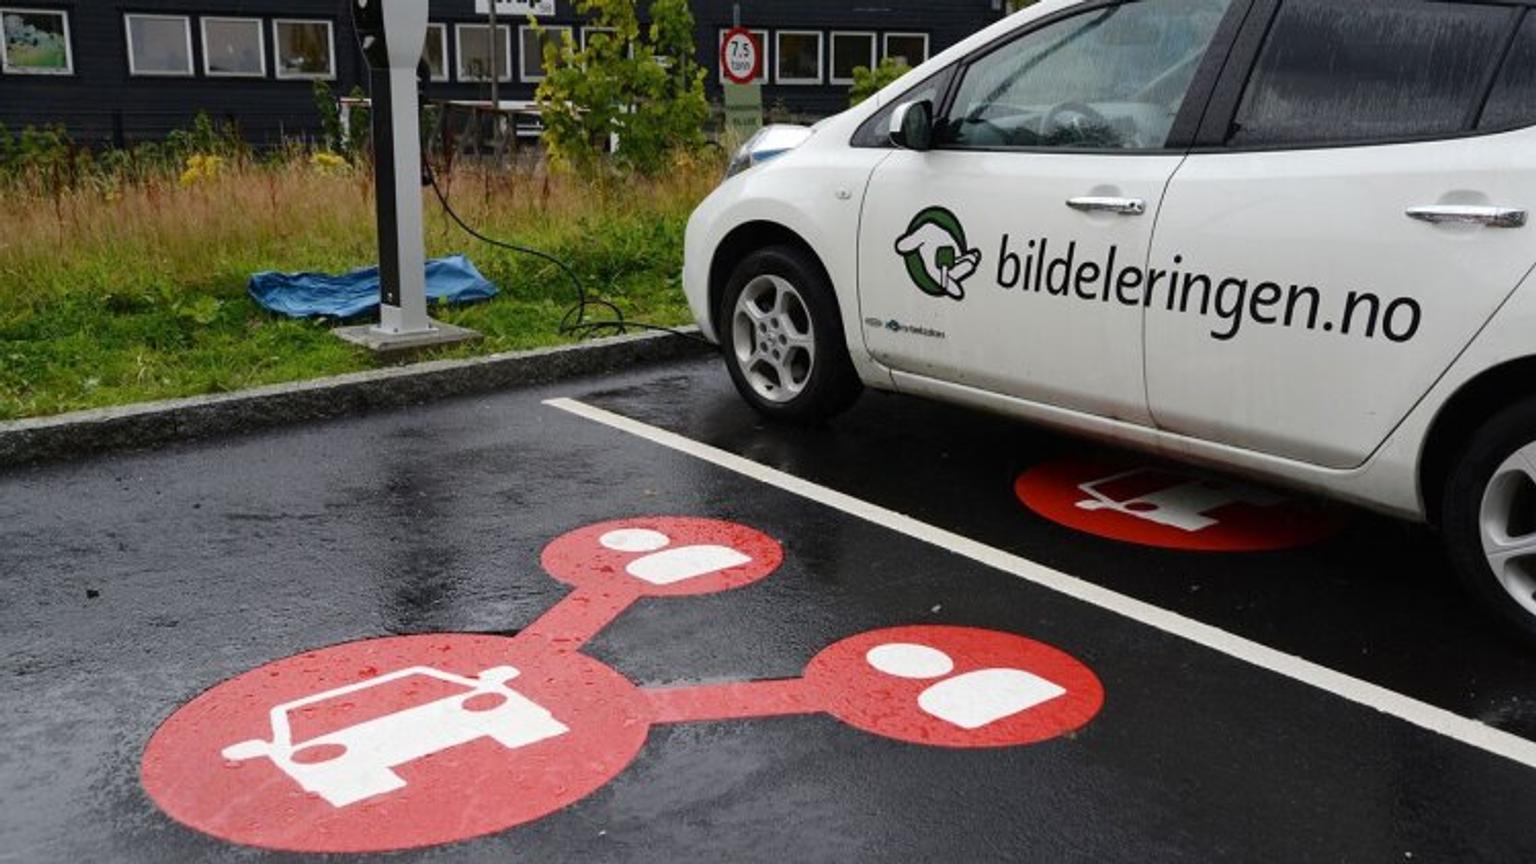 Parking lot with marking for electric car-sharing cars